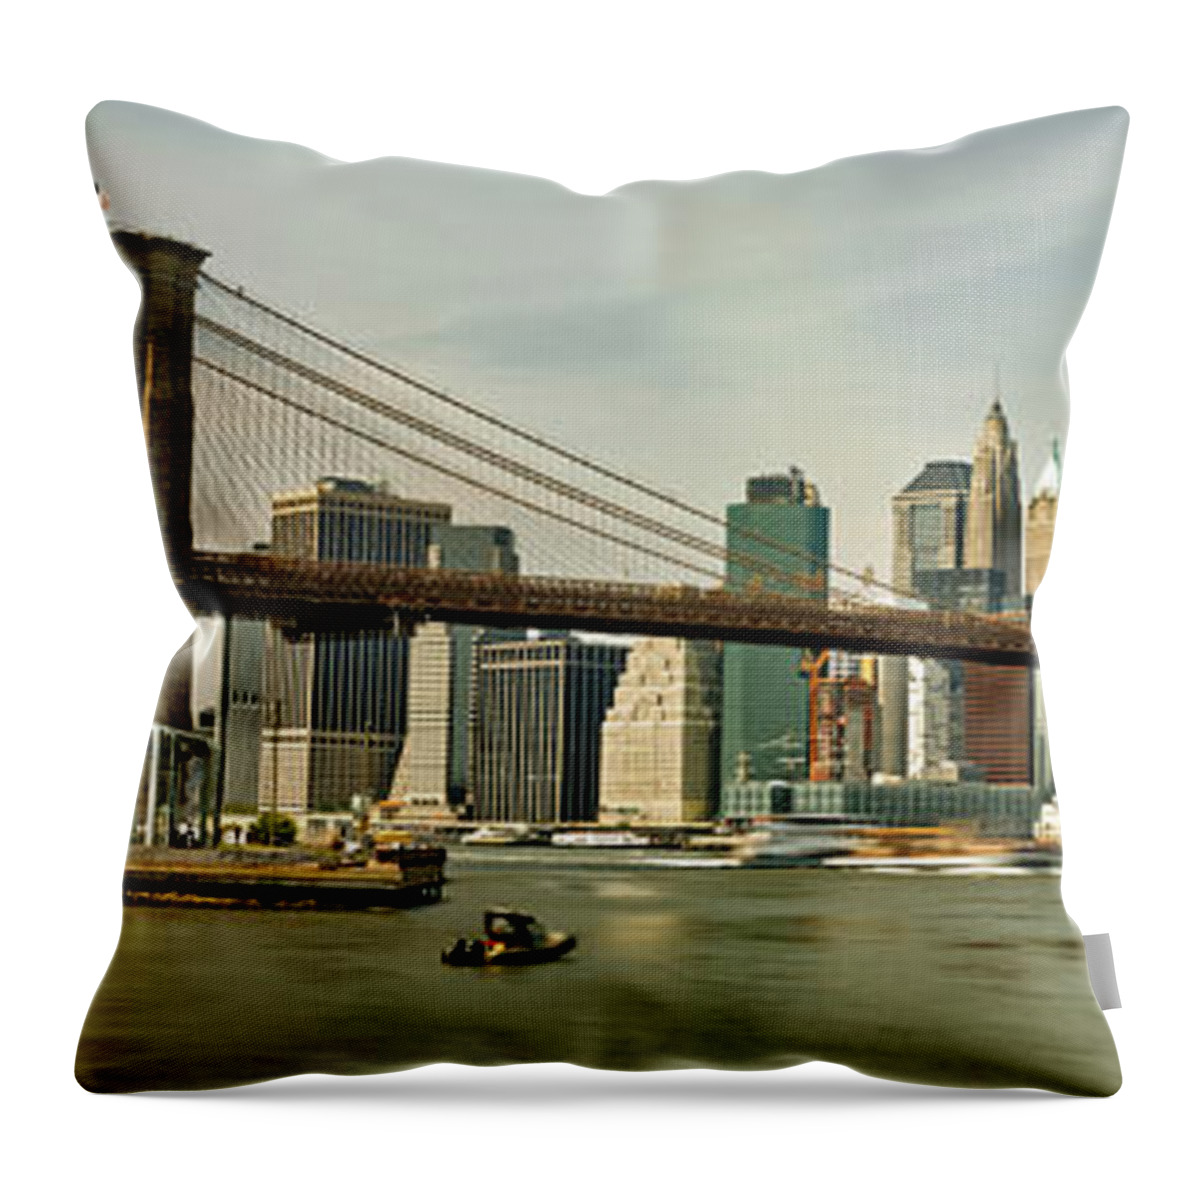 Brooklyn Bridge Throw Pillow featuring the photograph Brooklyn Bridge Panorama by Doolittle Photography and Art